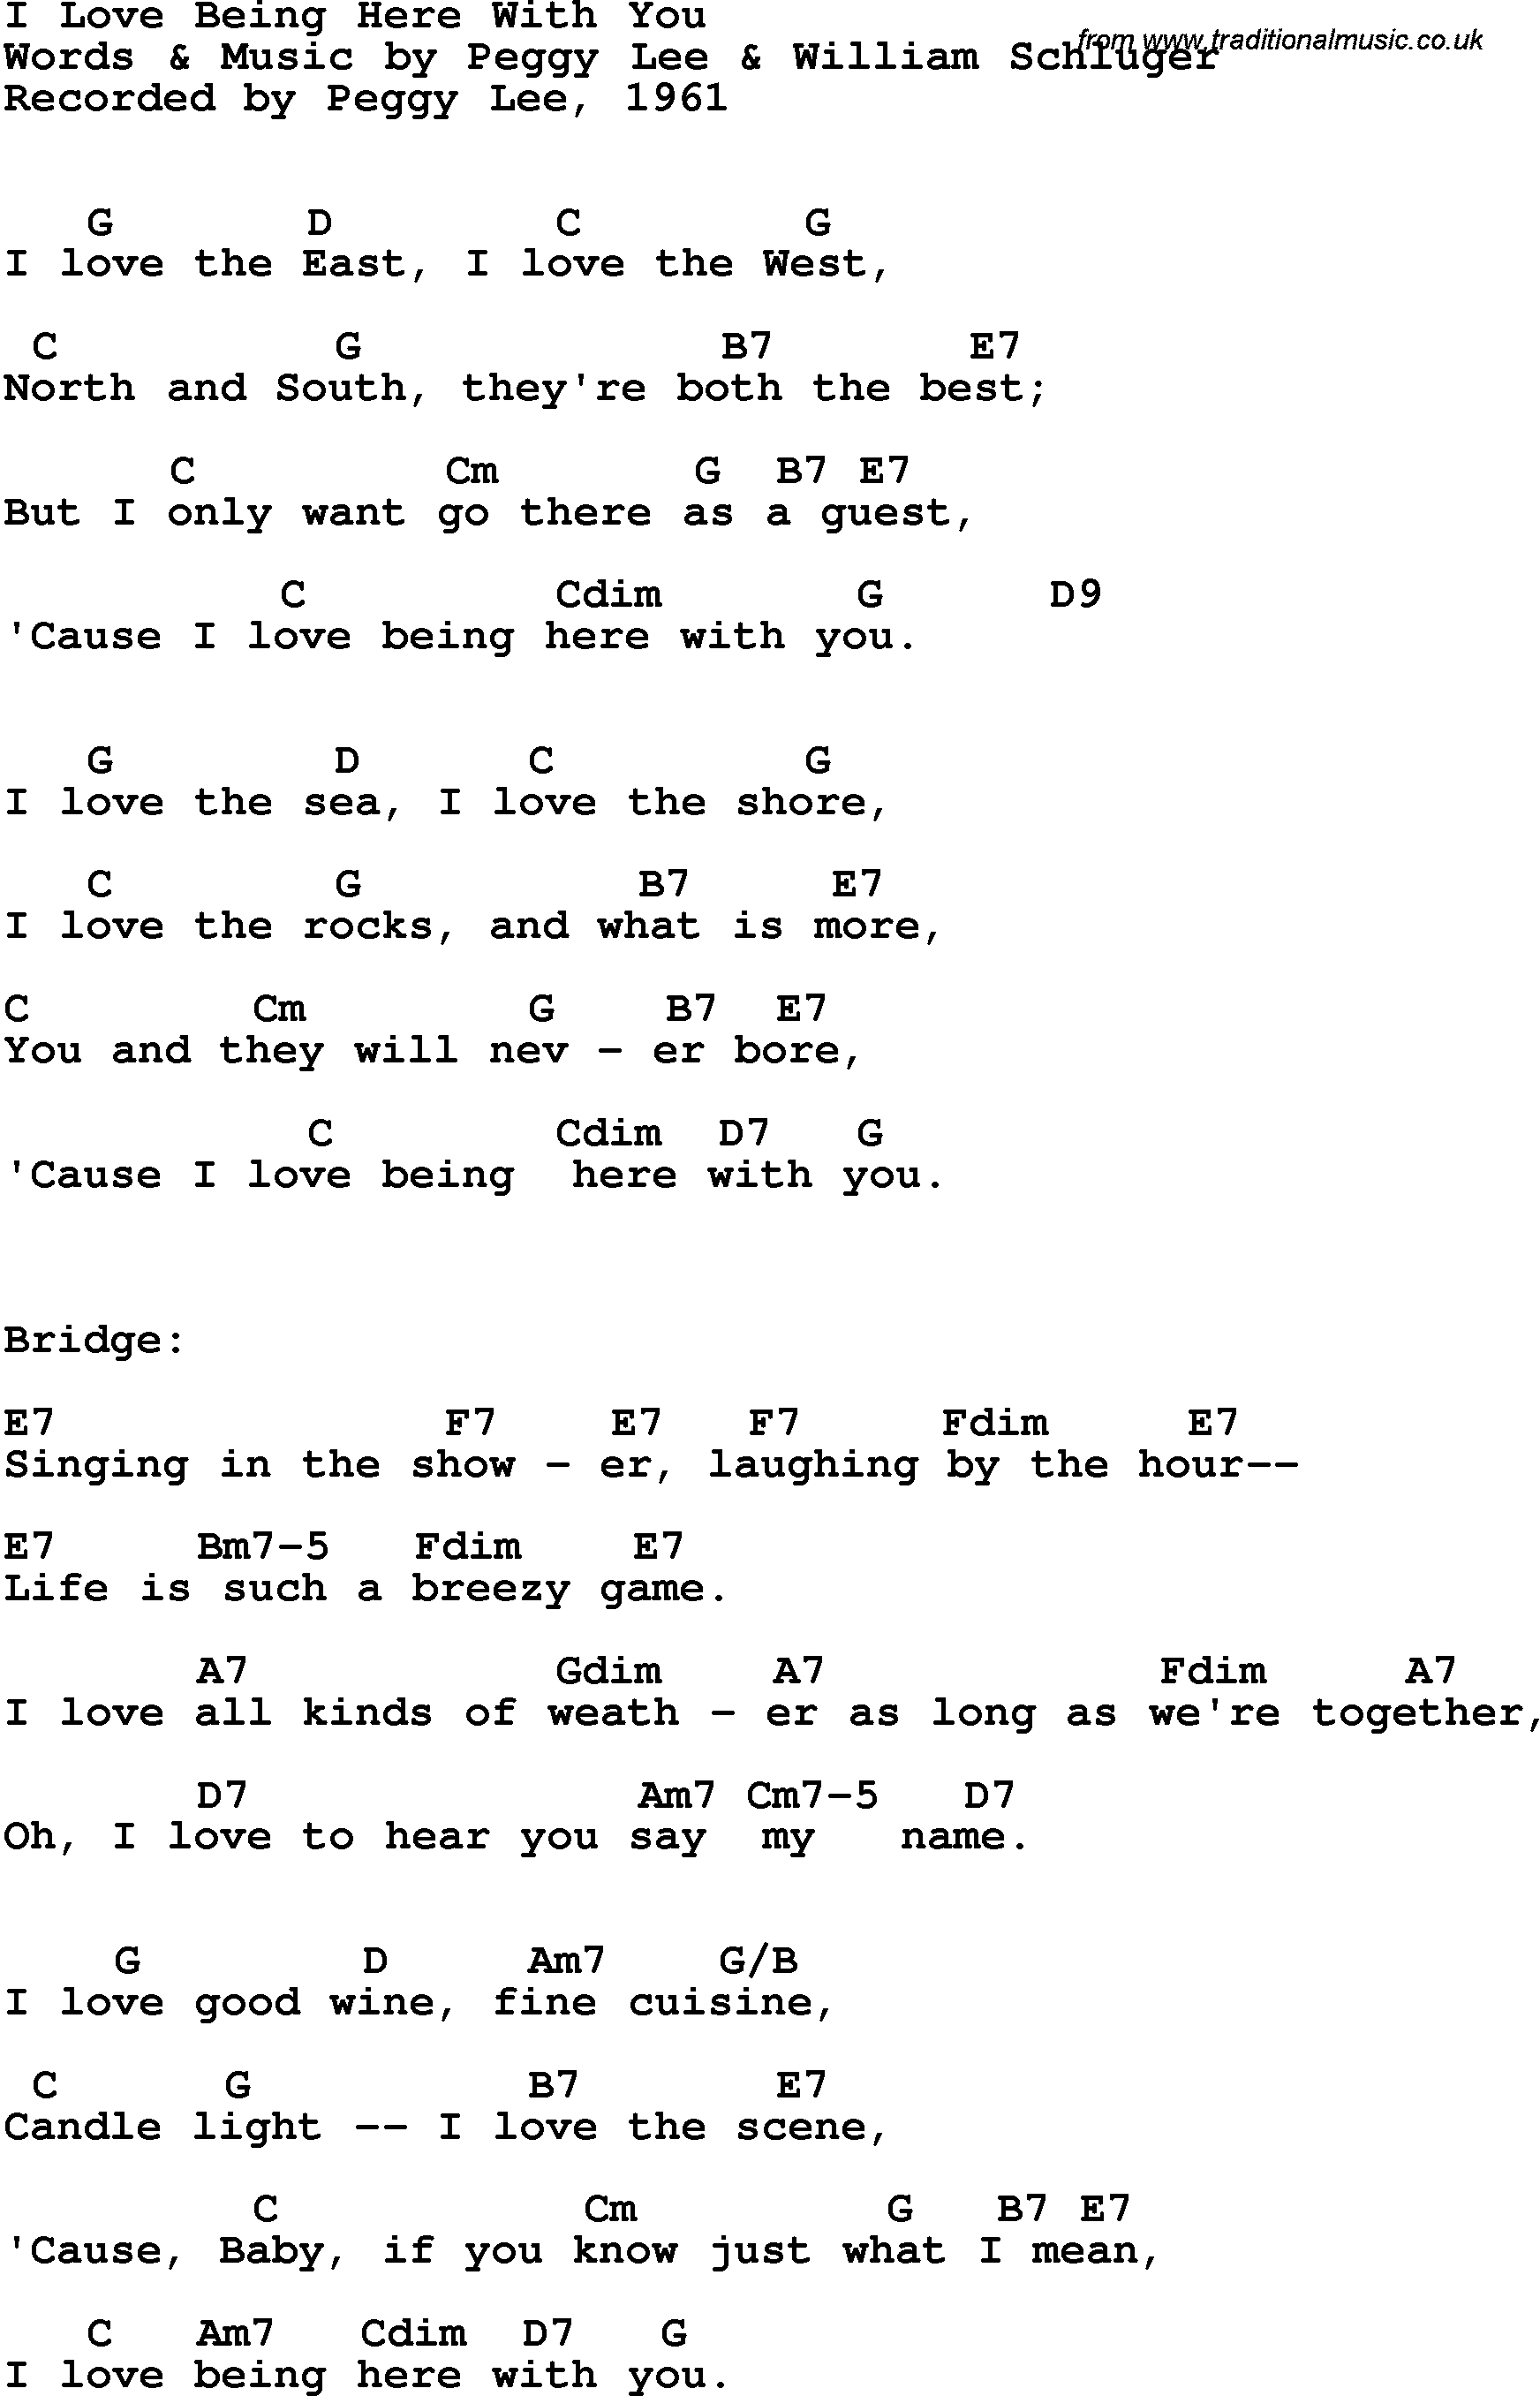 Song Lyrics with guitar chords for I Love Being Here With You - Peggy Lee, 1961